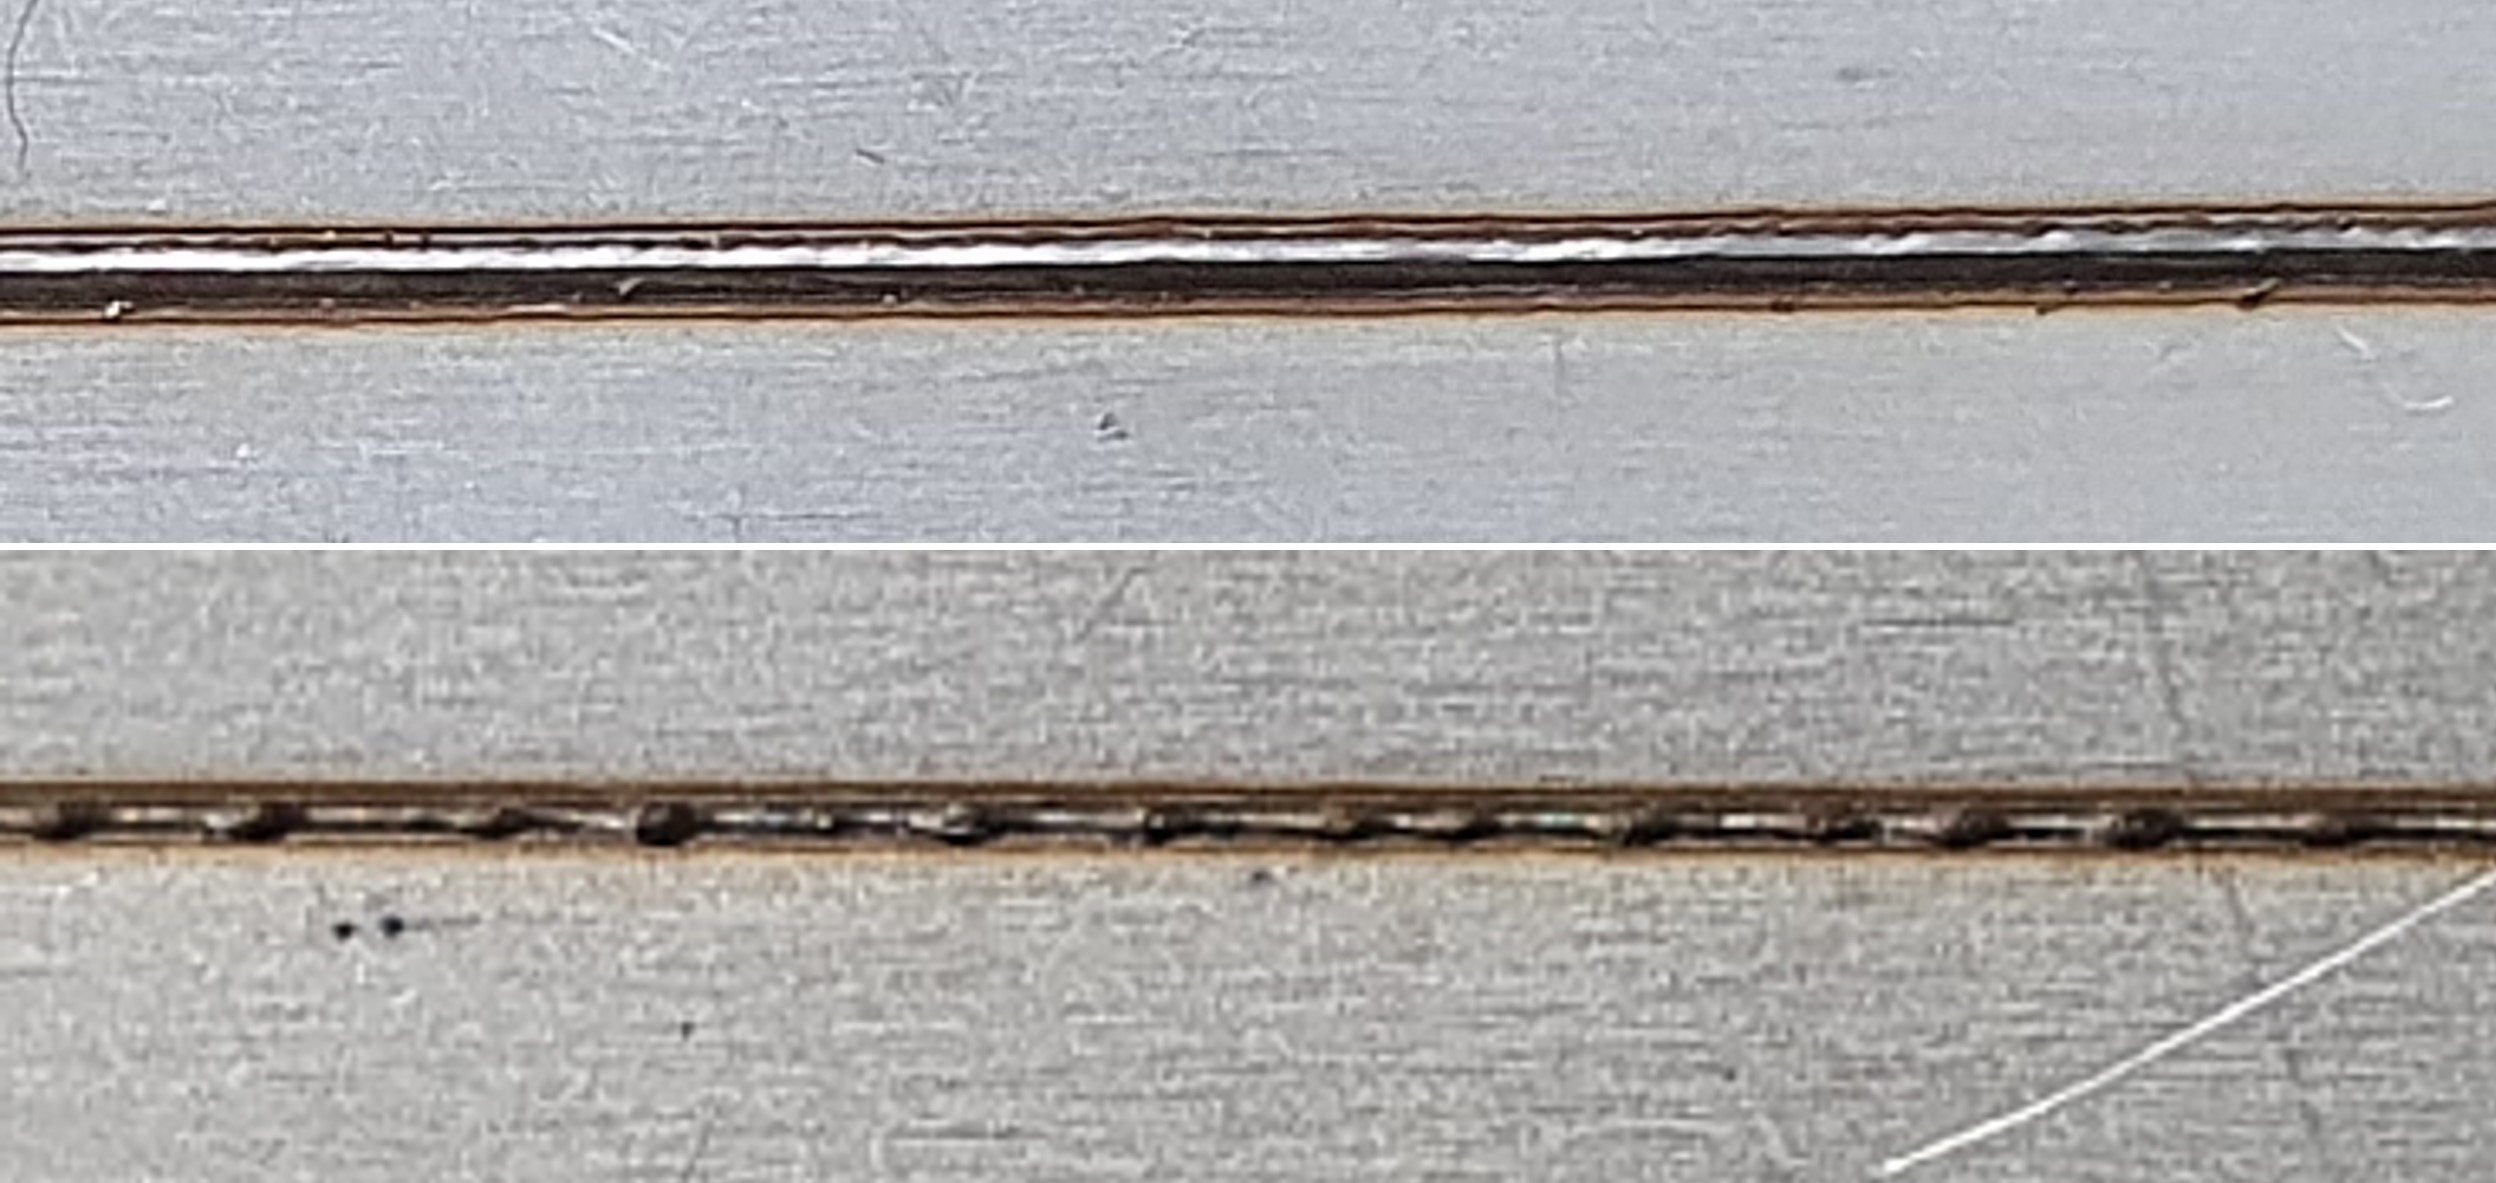 Laser welding in steel at 180 and 80 µm spot diameter and the same speed, humping effect of the smaller beam focus.